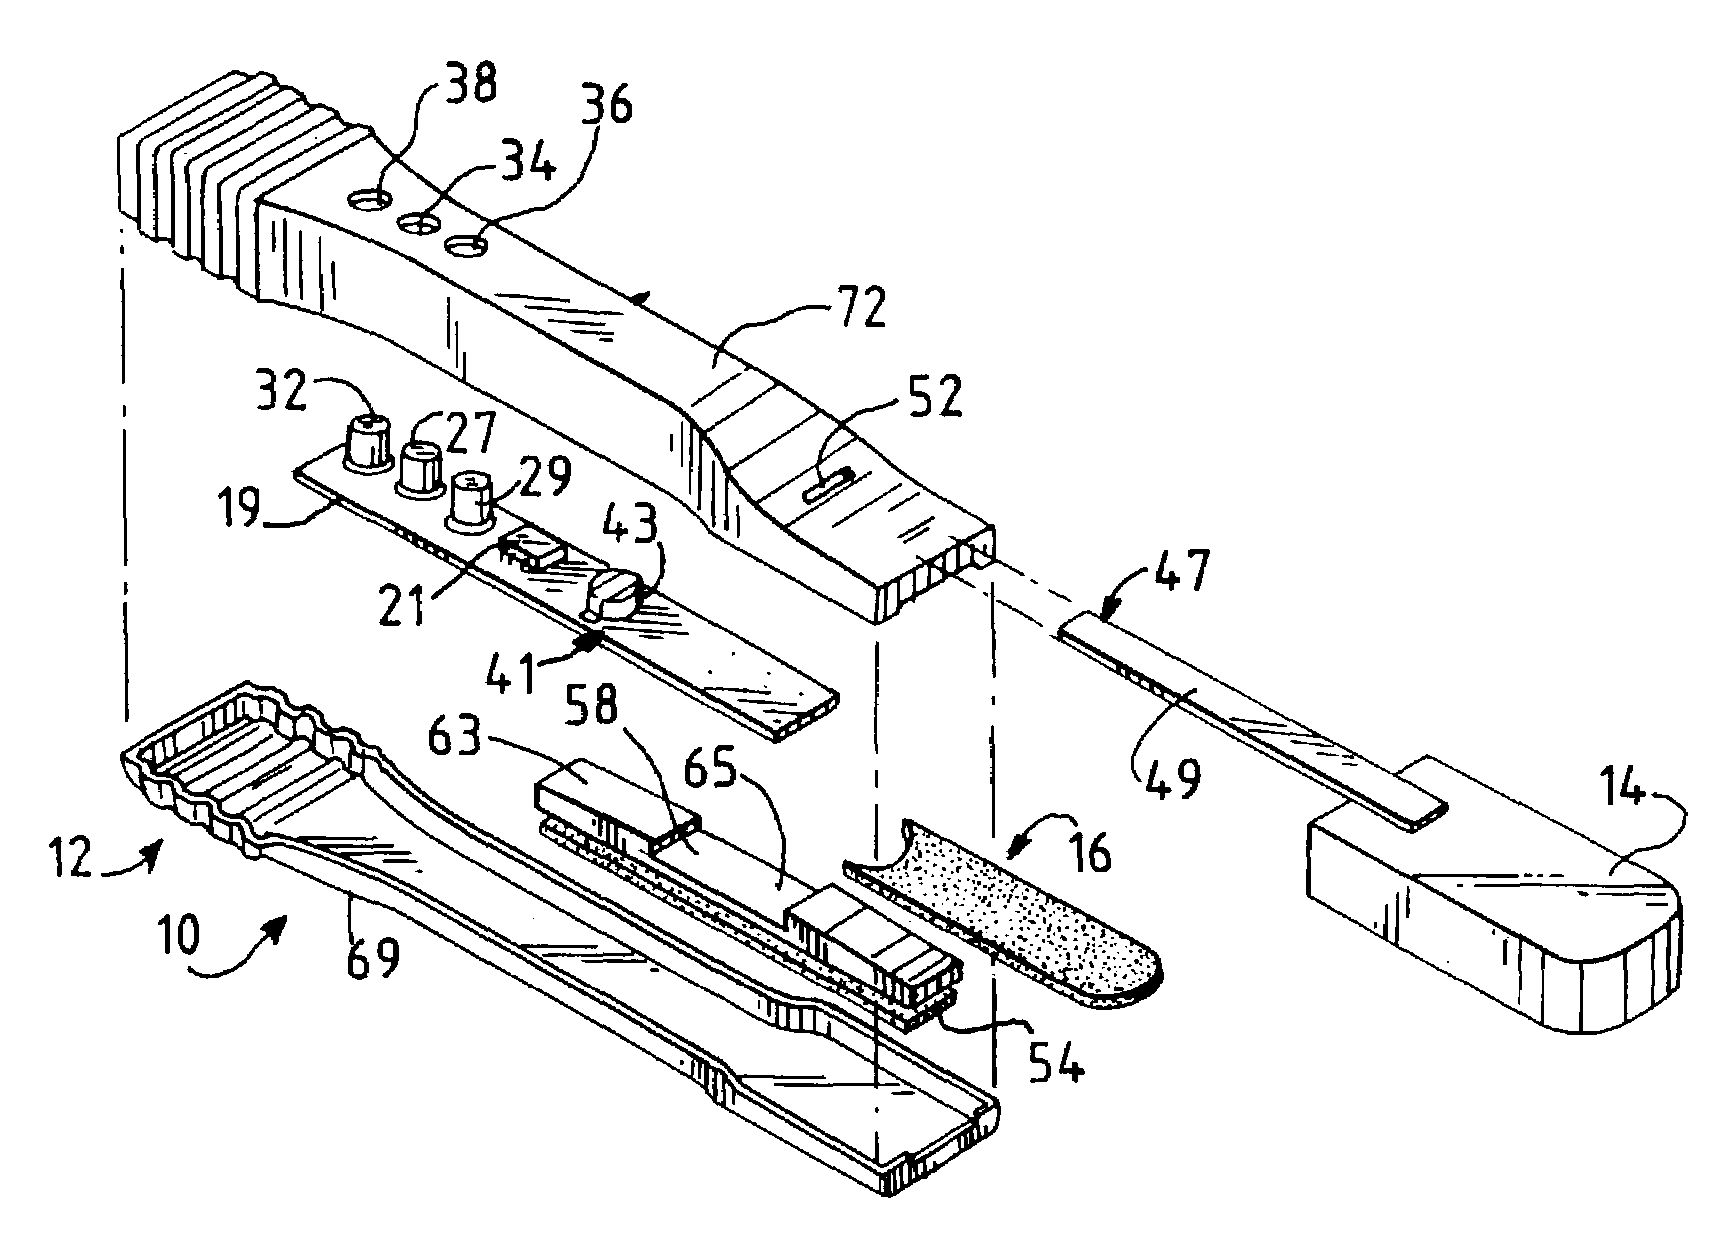 Assay test device and method of making same